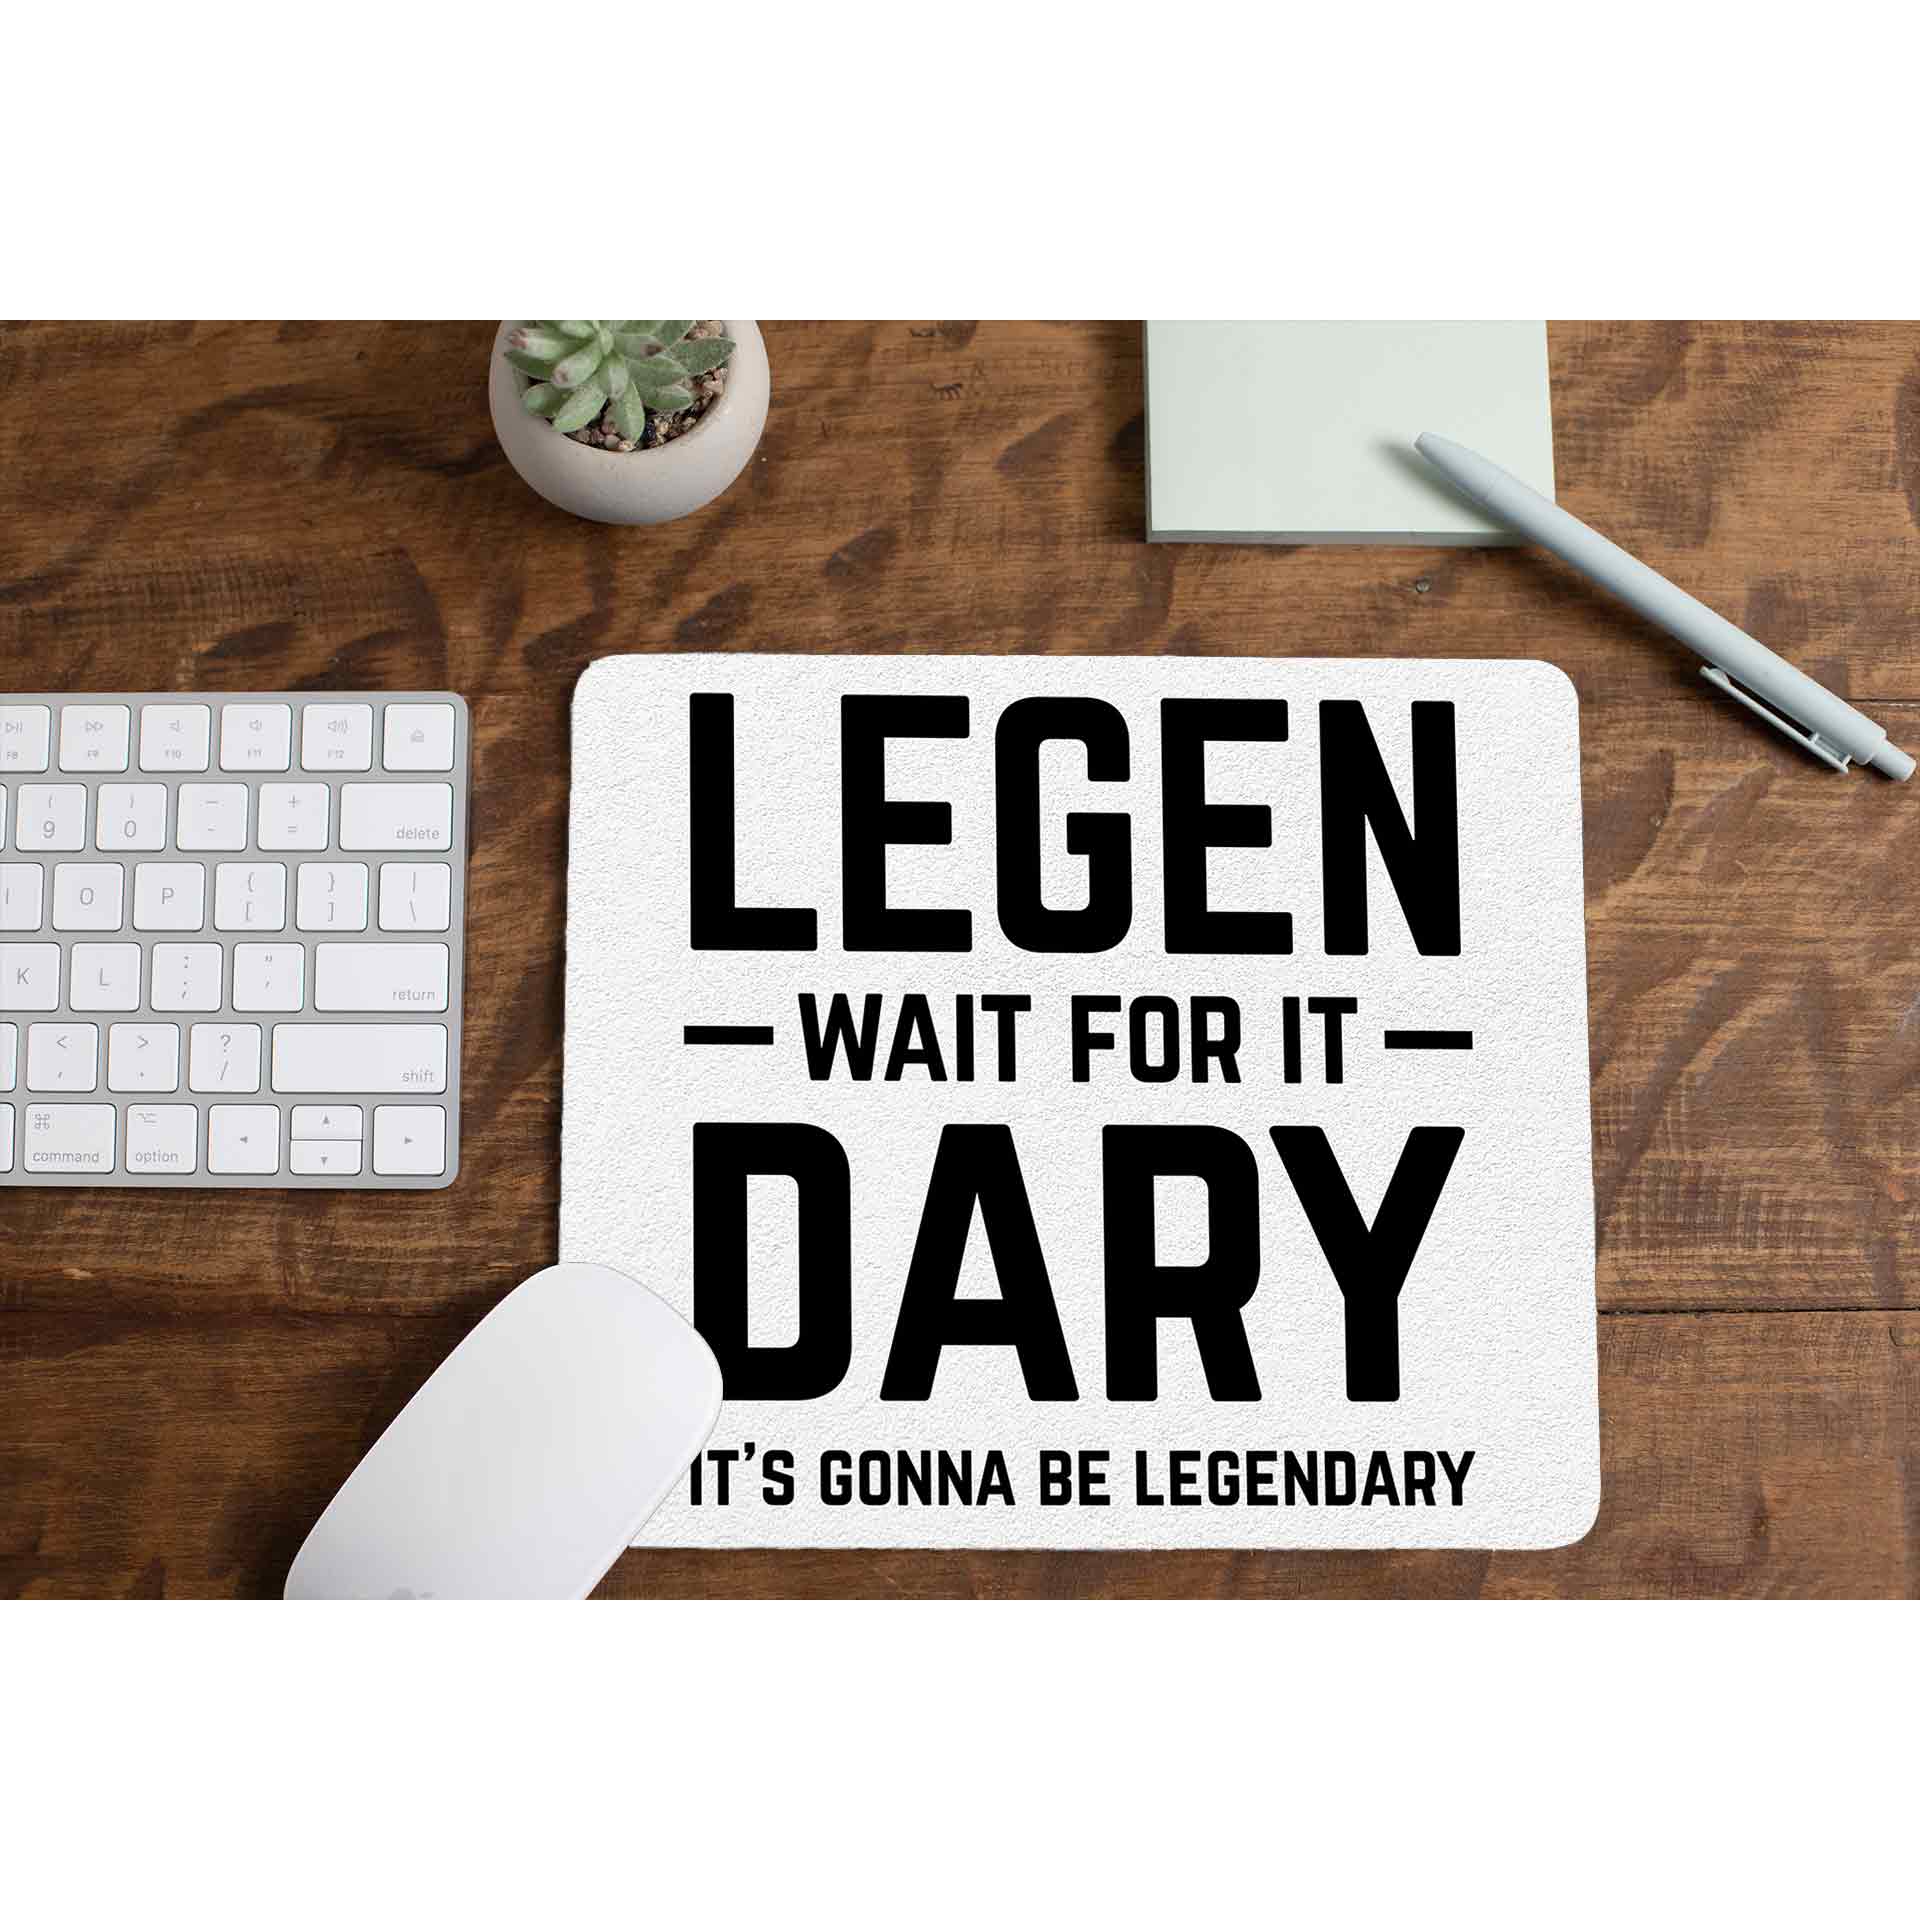 How I Met Your Mother Mousepad - Legendary The Banyan Tee TBT